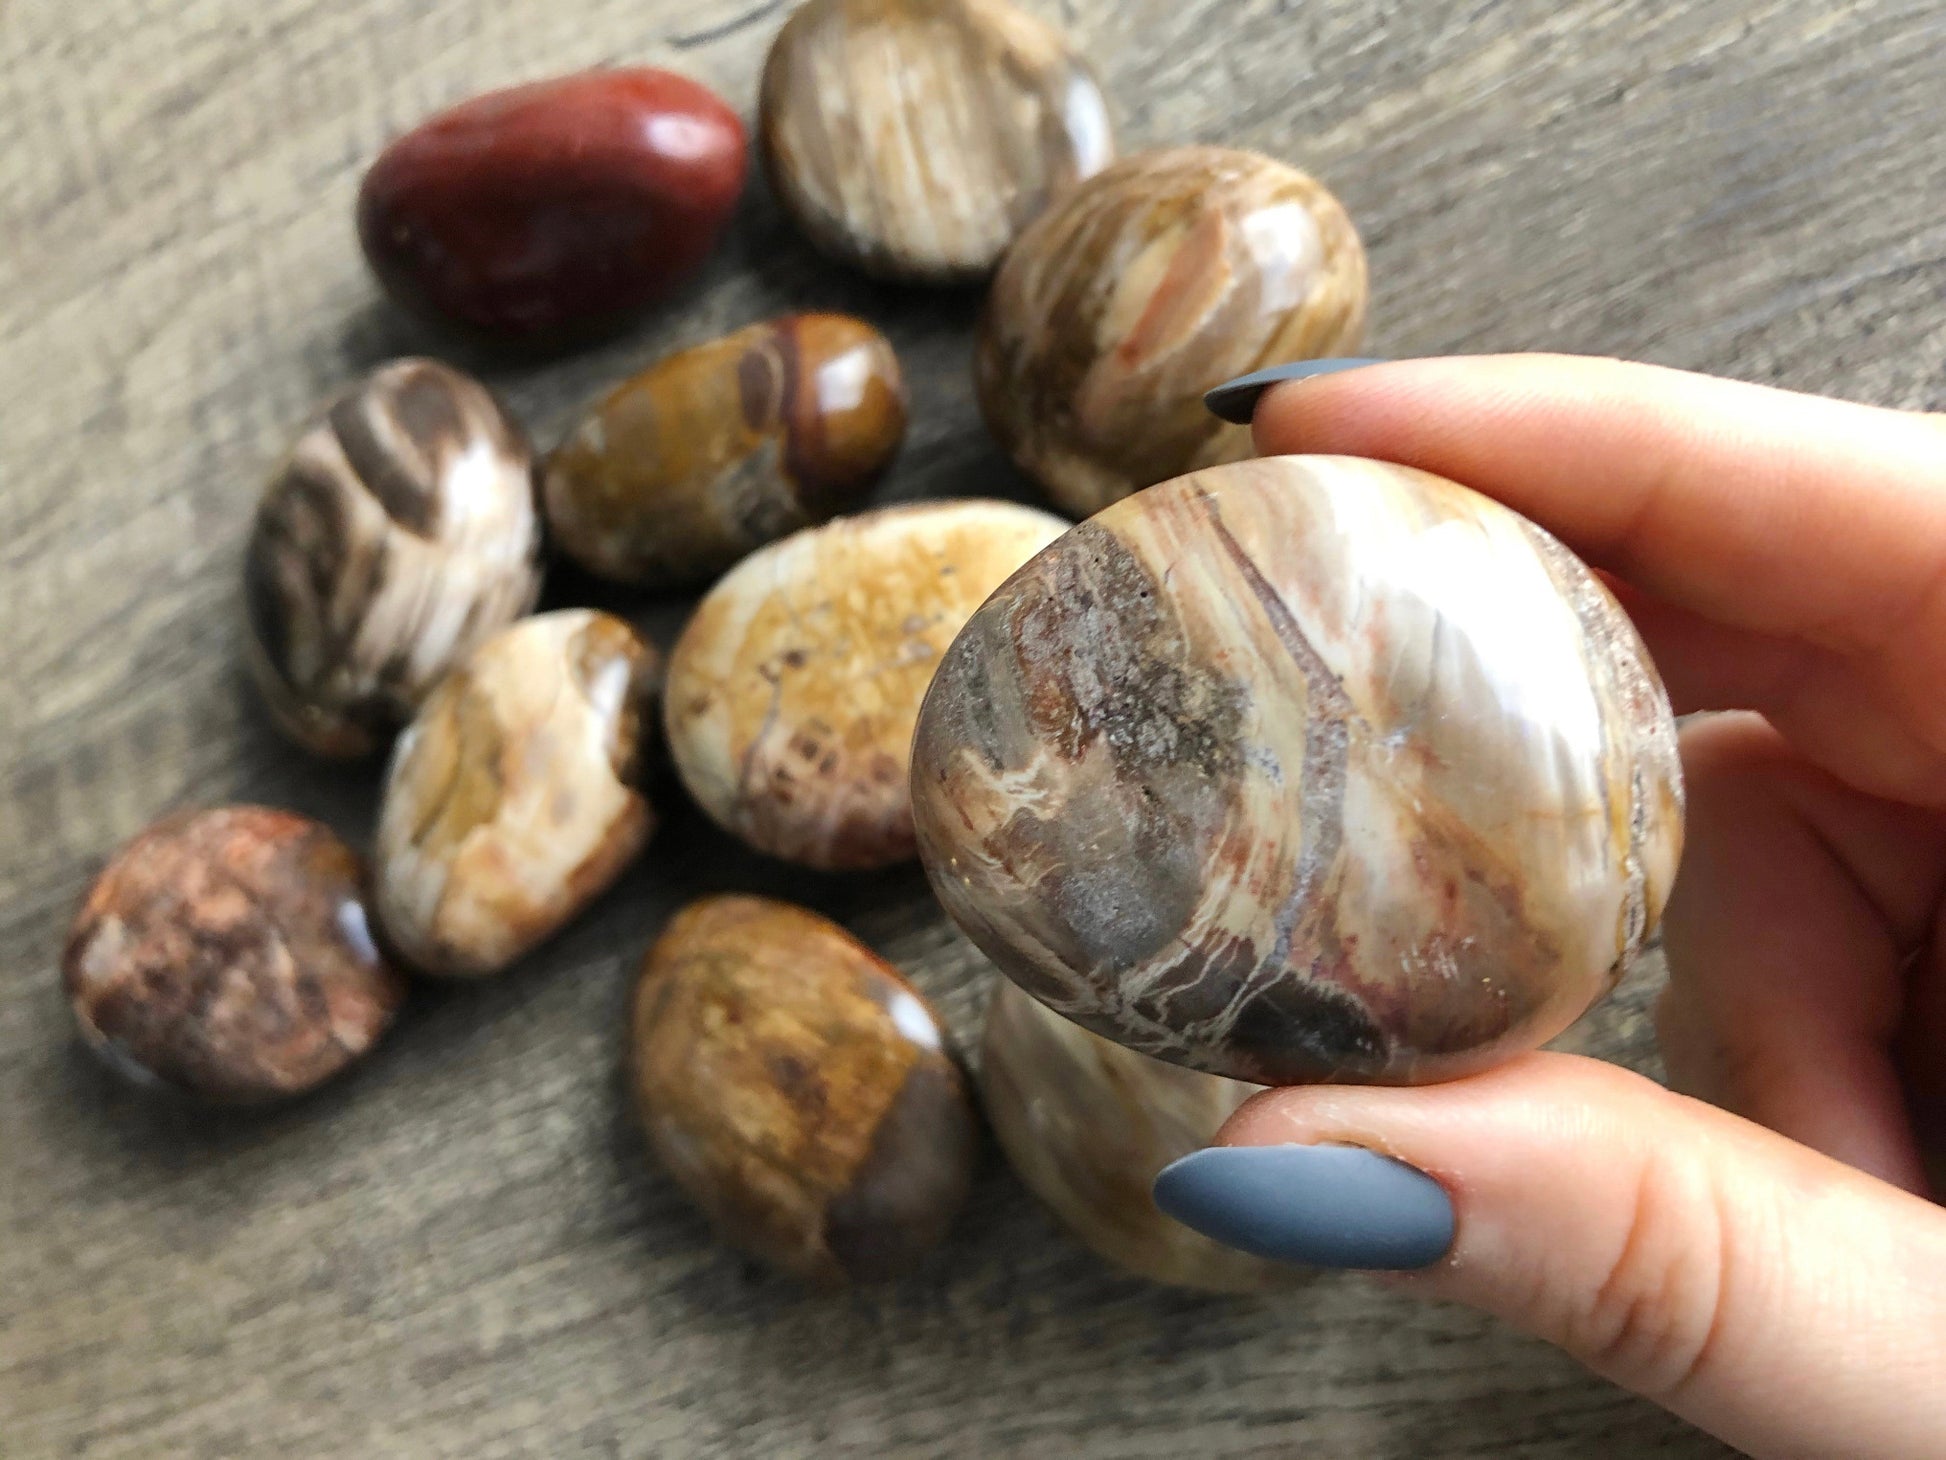 Pictured are various polished petrified wood palm stones.